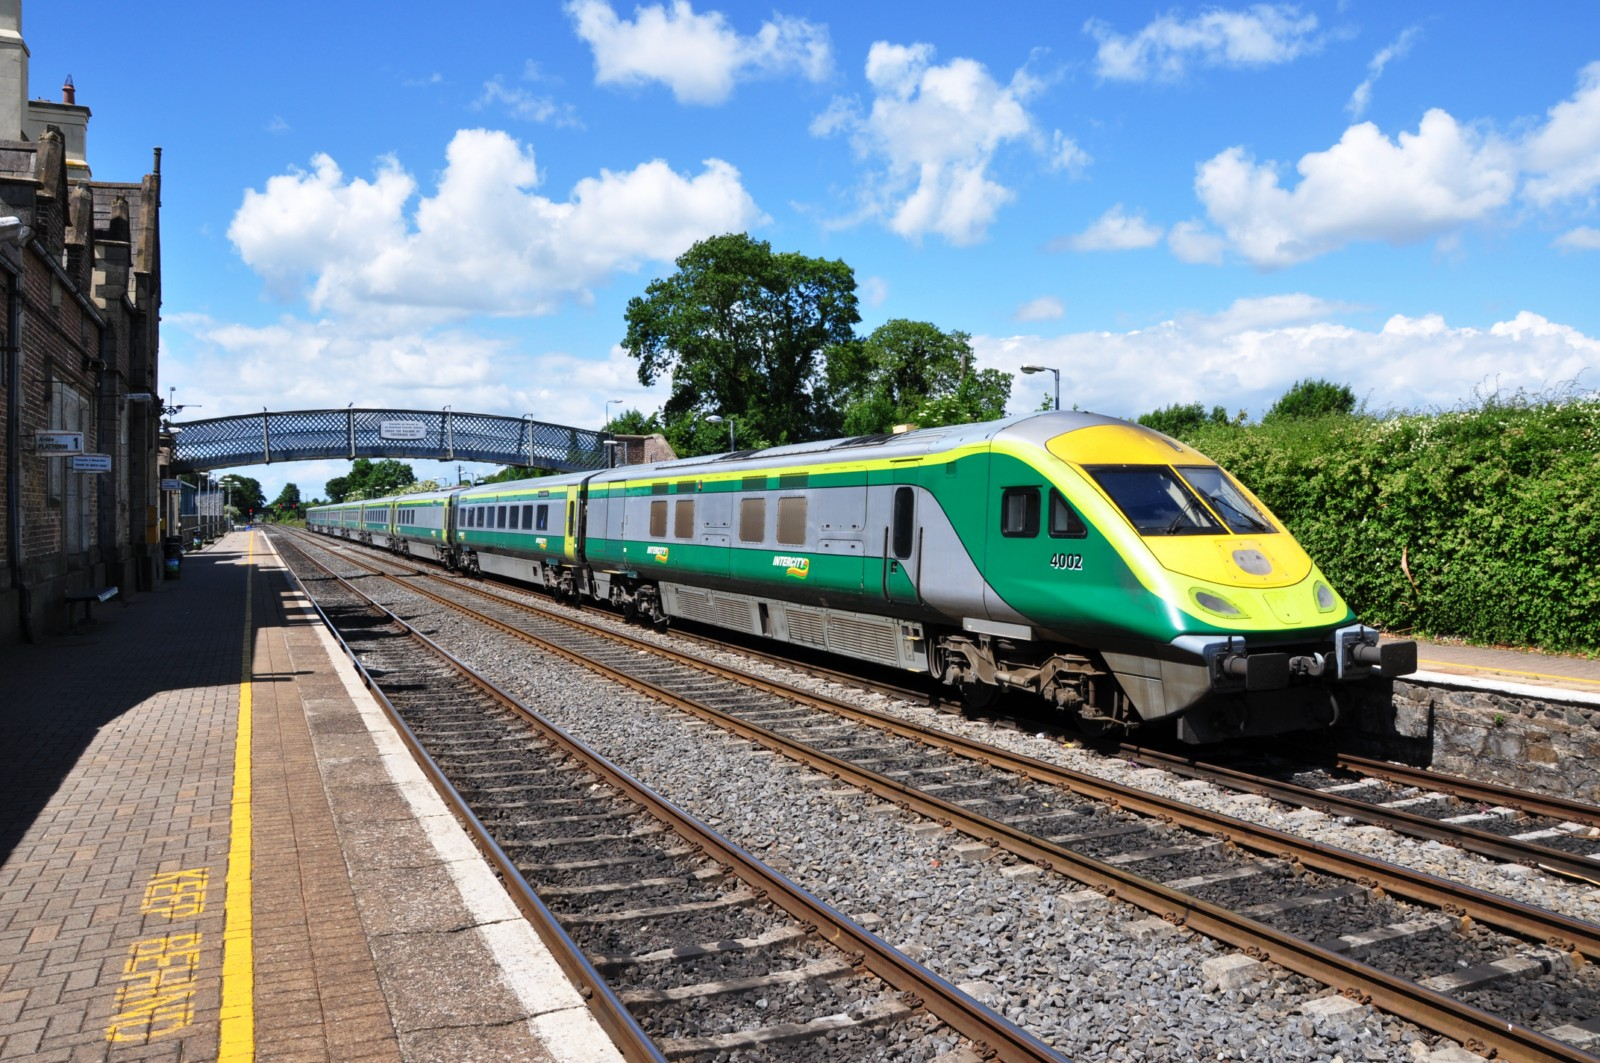 An intercity train at a railway station, that could be anywhere in Ireland